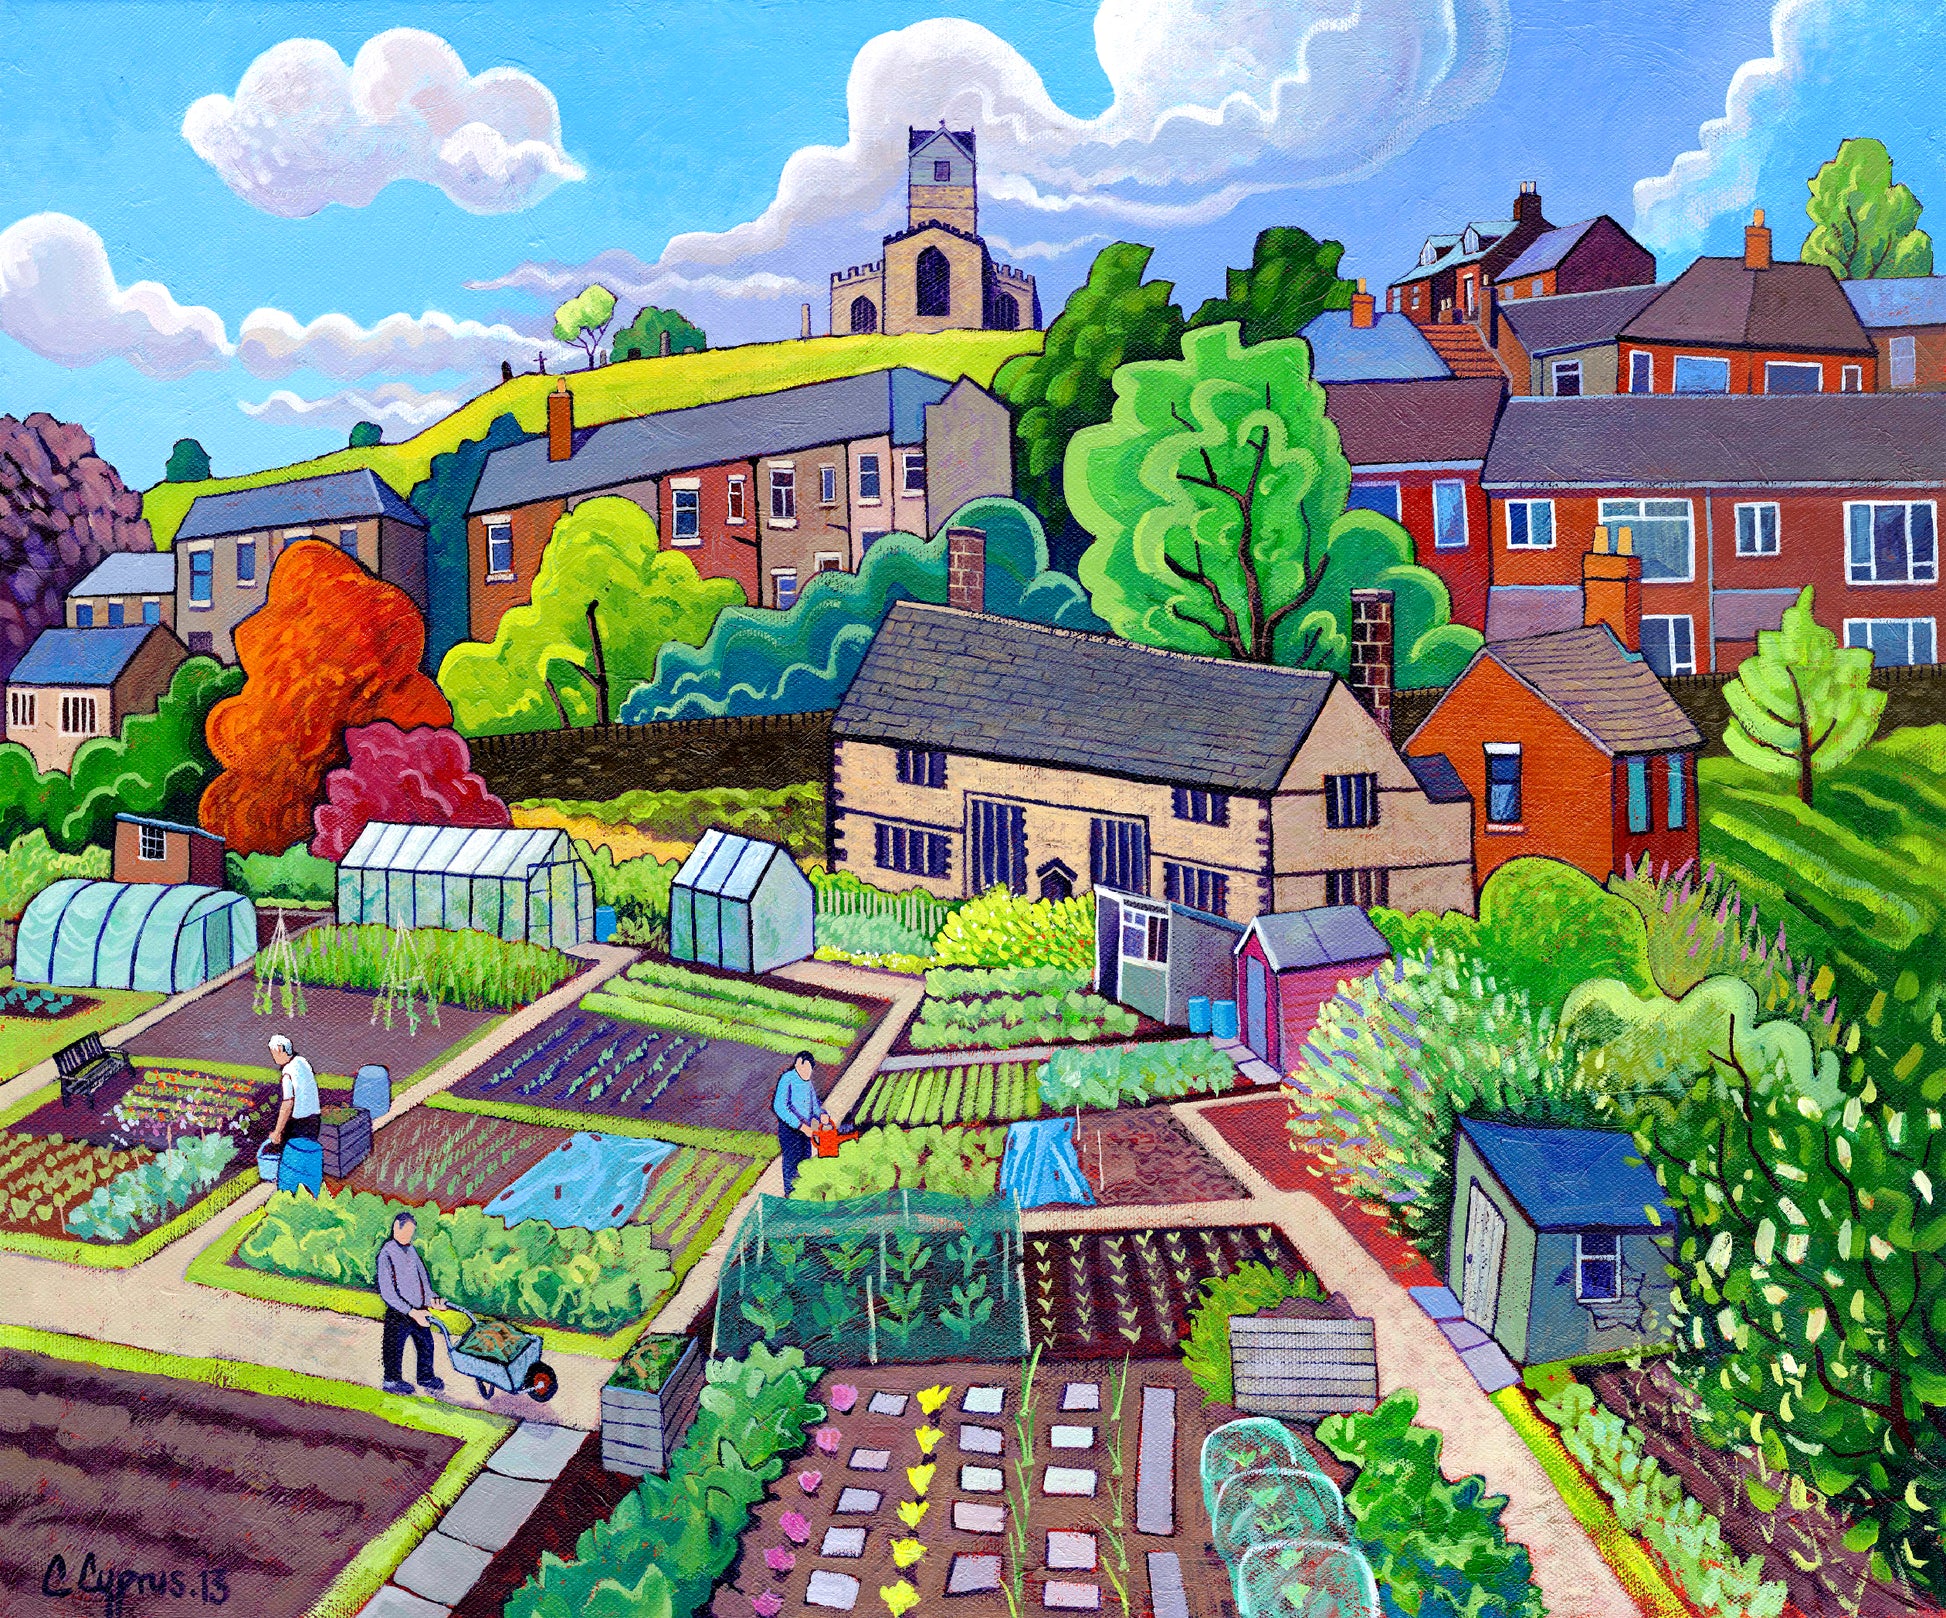 Oil Painting 'Cottage Industry' by famous British artist Chris Cyprus. Features a large allotment scene surrounded by a northern village and church sitting above on the hill. © Chris Cyprus 2013 archive